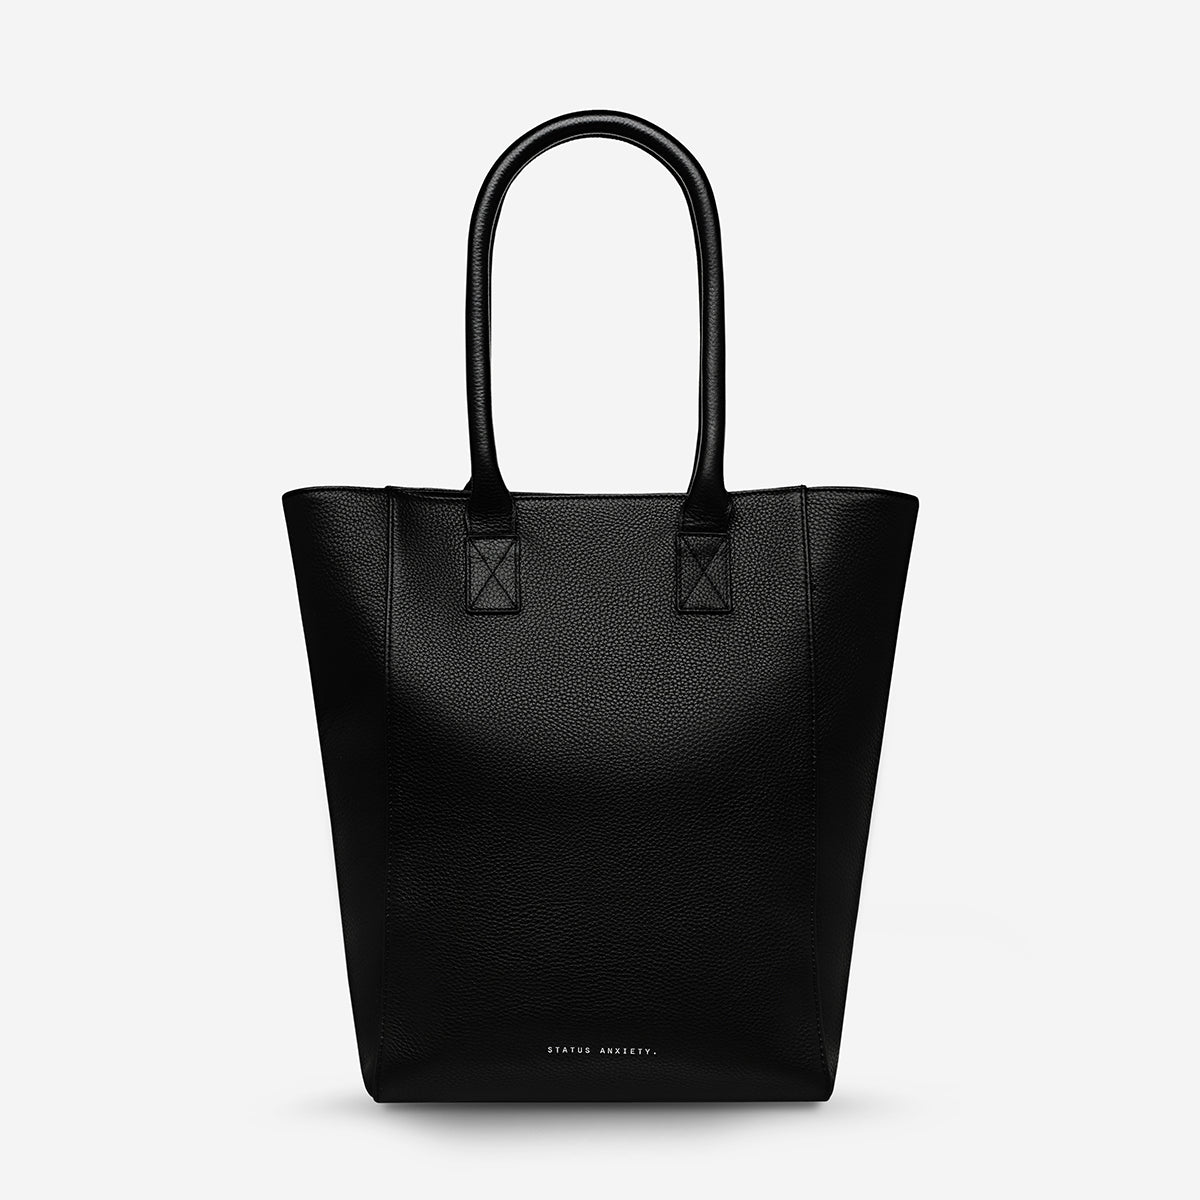 Status Anxiety Abscond Women's Leather Tote Bag Black